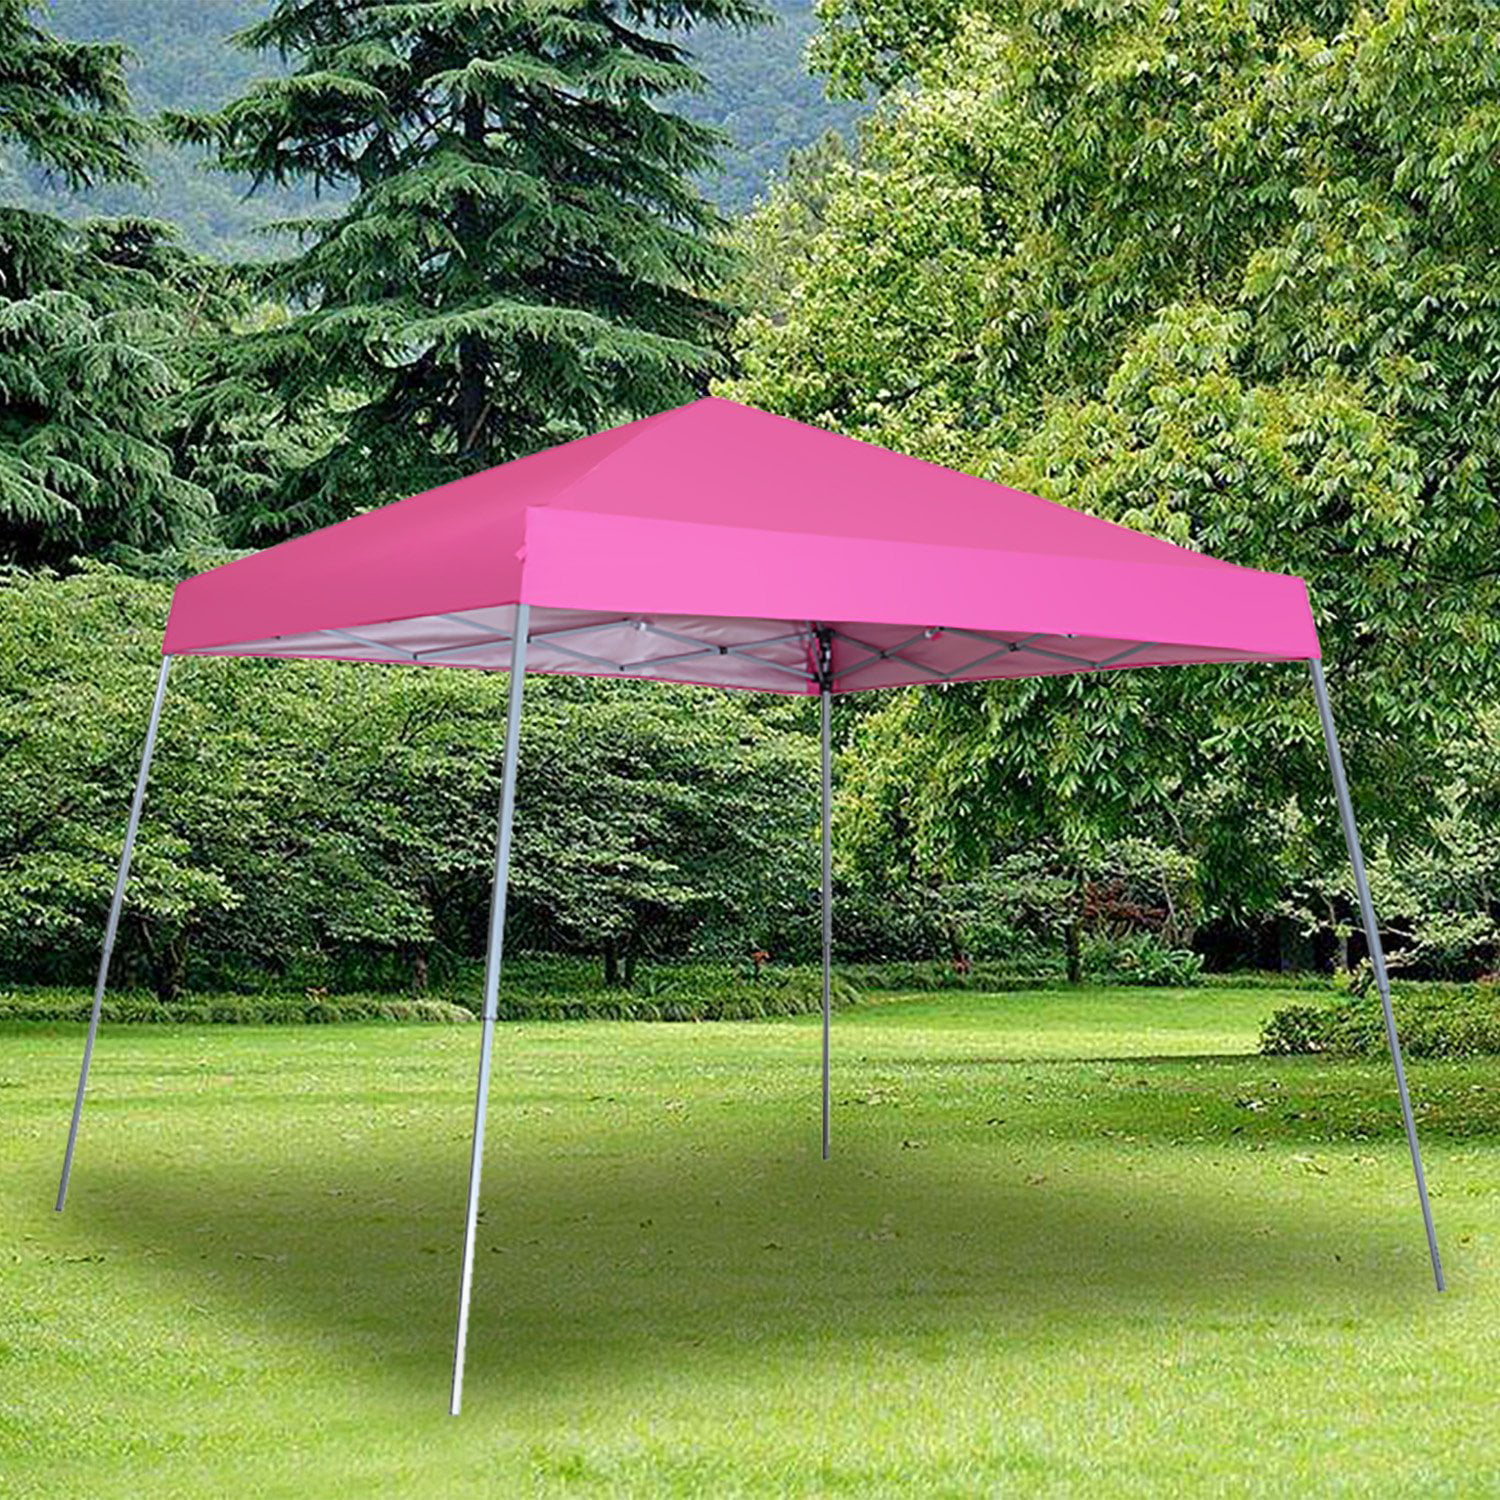 8 x 8 Ft Canopies 10x 10 Ft Base Slant Legs Pop up Canopy Tent for ...